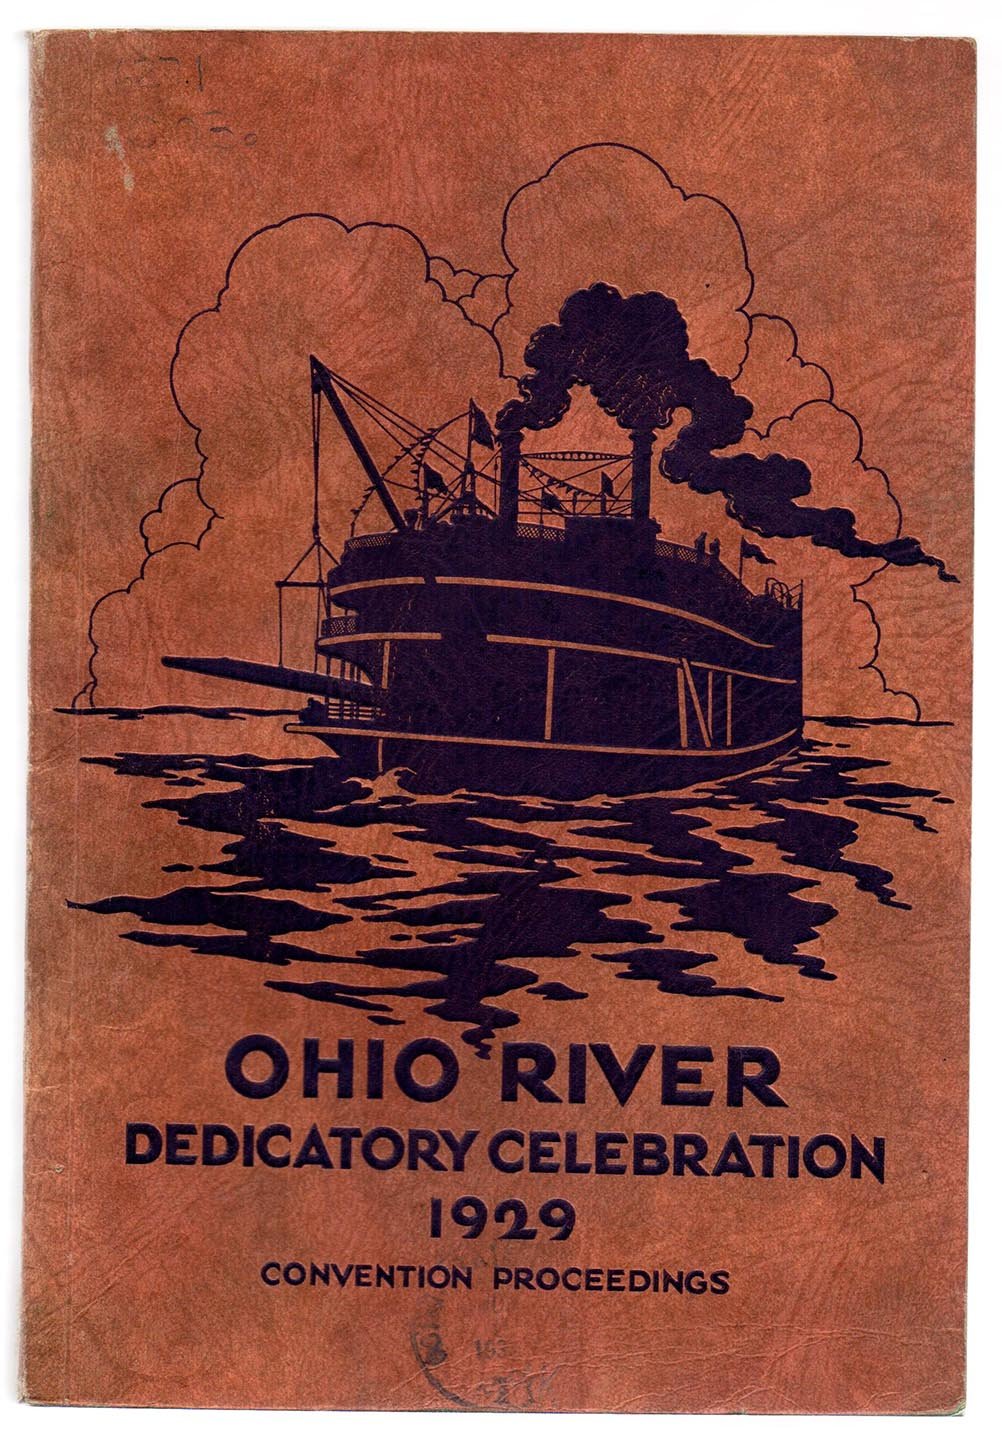 Ohio River Dedicatory Celebration: Thirty-fifth Annual Convention of the Ohio Valley Improvement Association